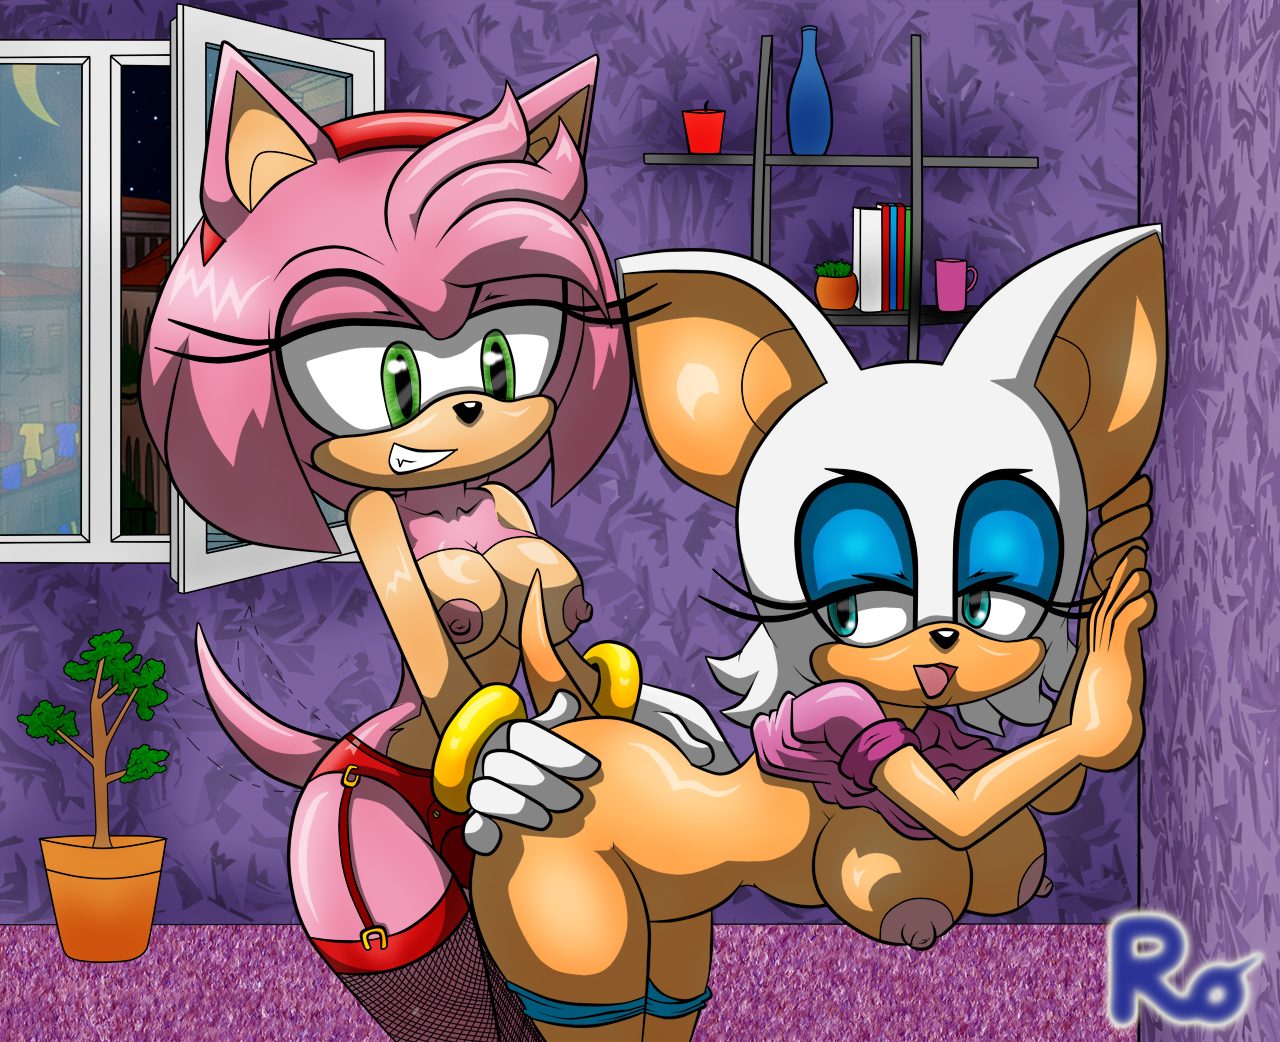 Rouge and amy nackt.